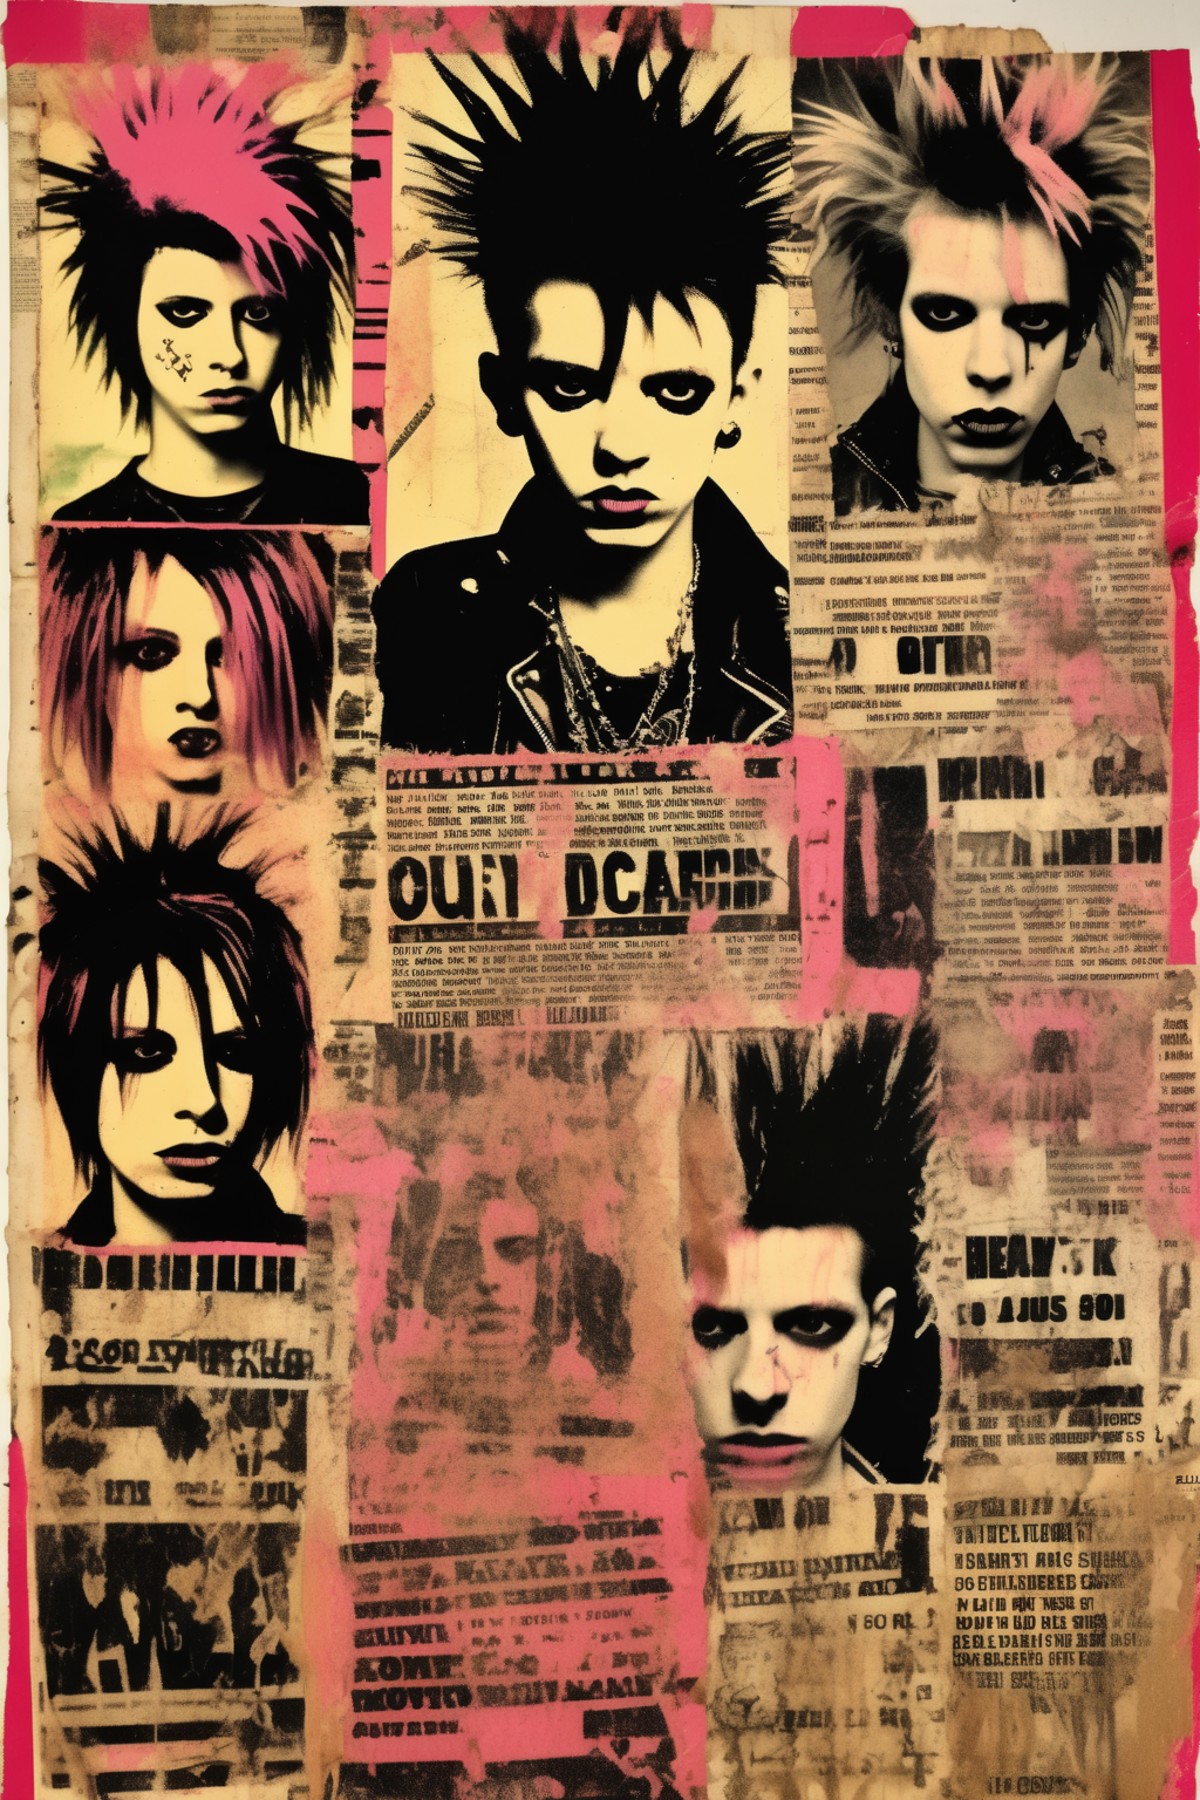 <lora:Punk Collage:1>Punk Collage - Punk rock flier rough high contrast poor condition 10th generation photocopy.